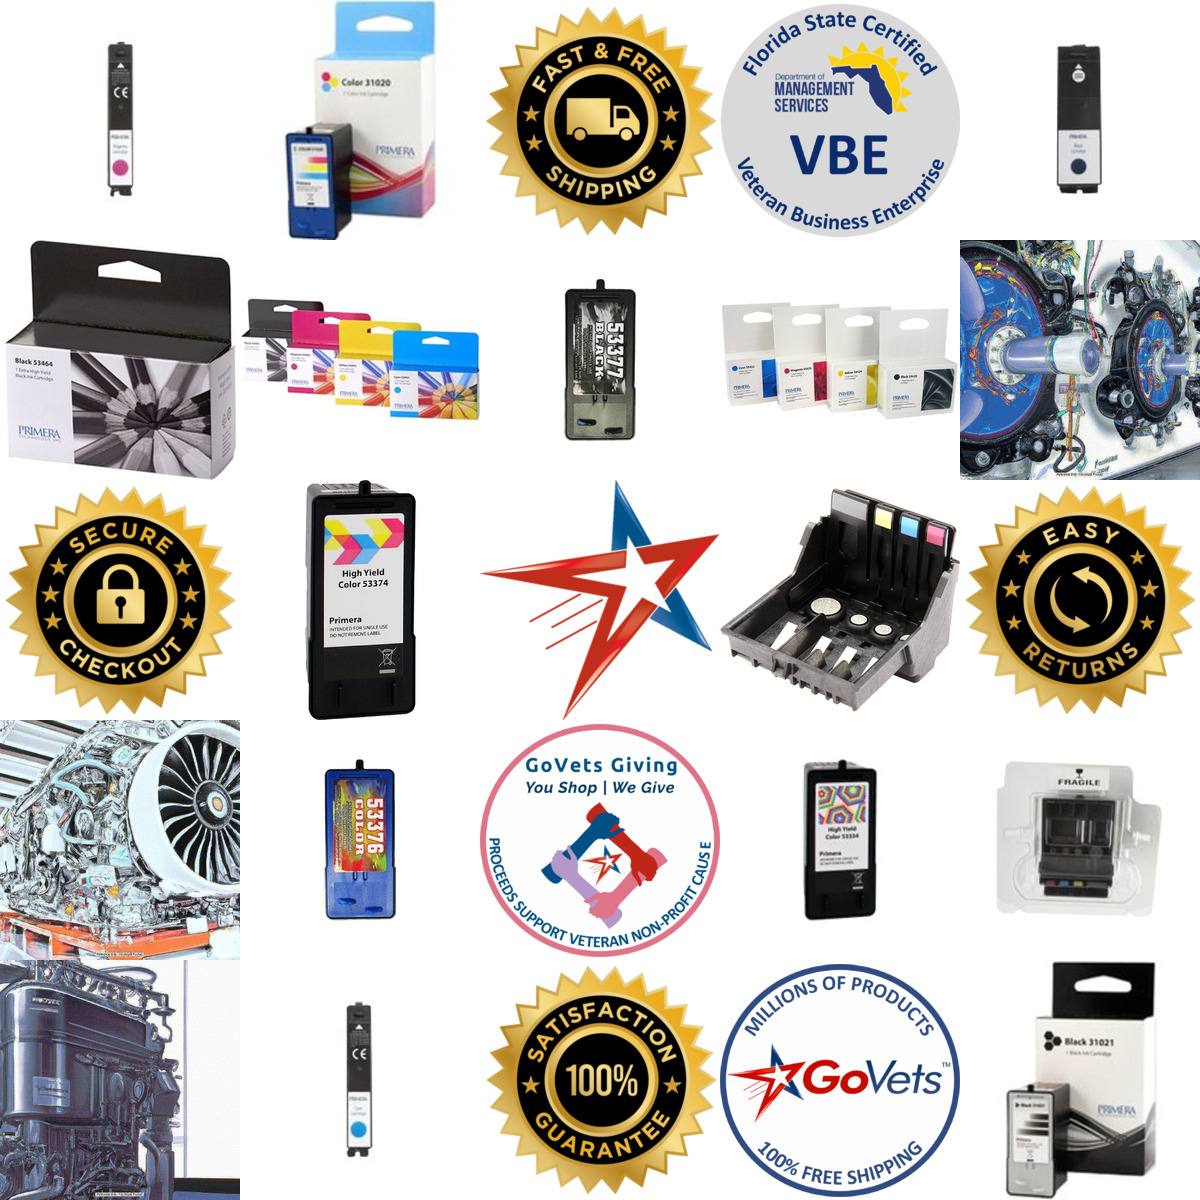 A selection of Primera Technology inc. products on GoVets